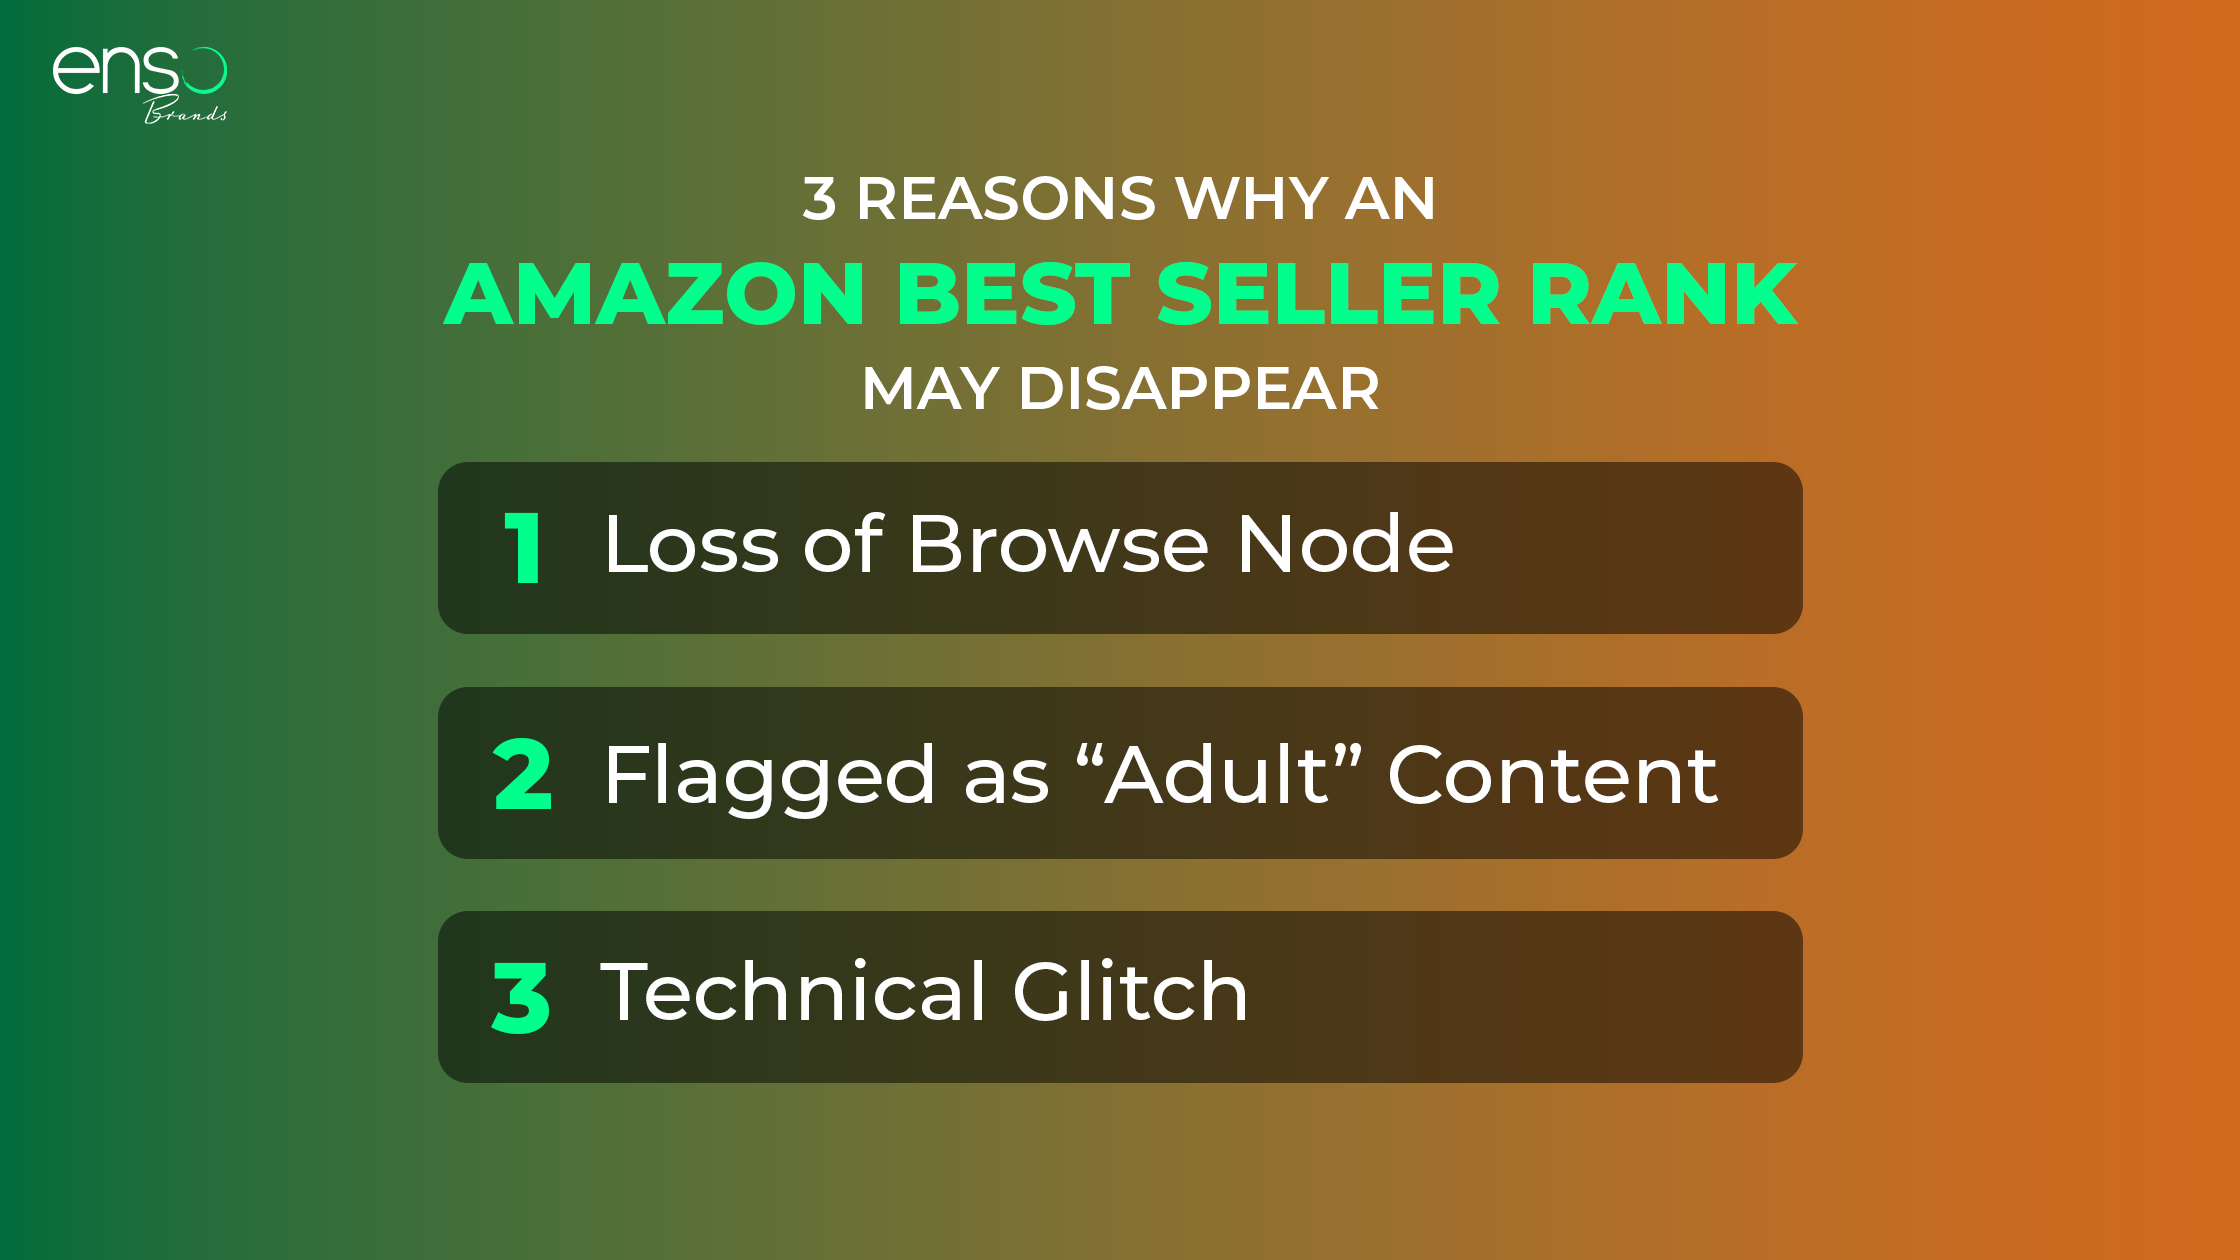 https://ensobrands.com/wp-content/uploads/2023/07/3-Reasons-ABSR-May-Disappear.png